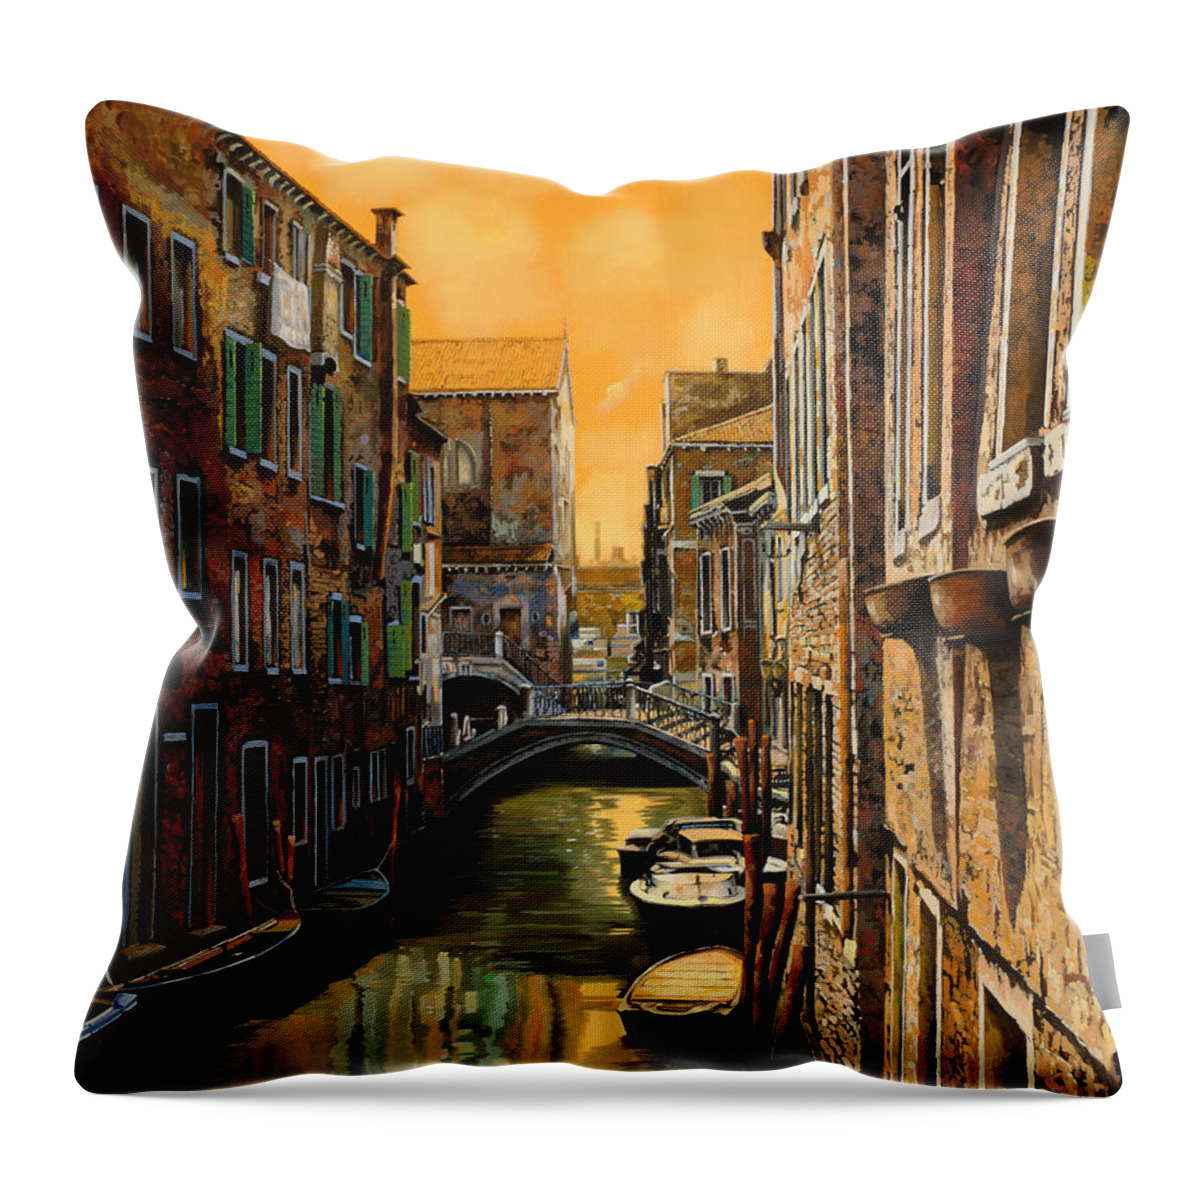 Venice Throw Pillow featuring the painting Venezia Al Tramonto by Guido Borelli